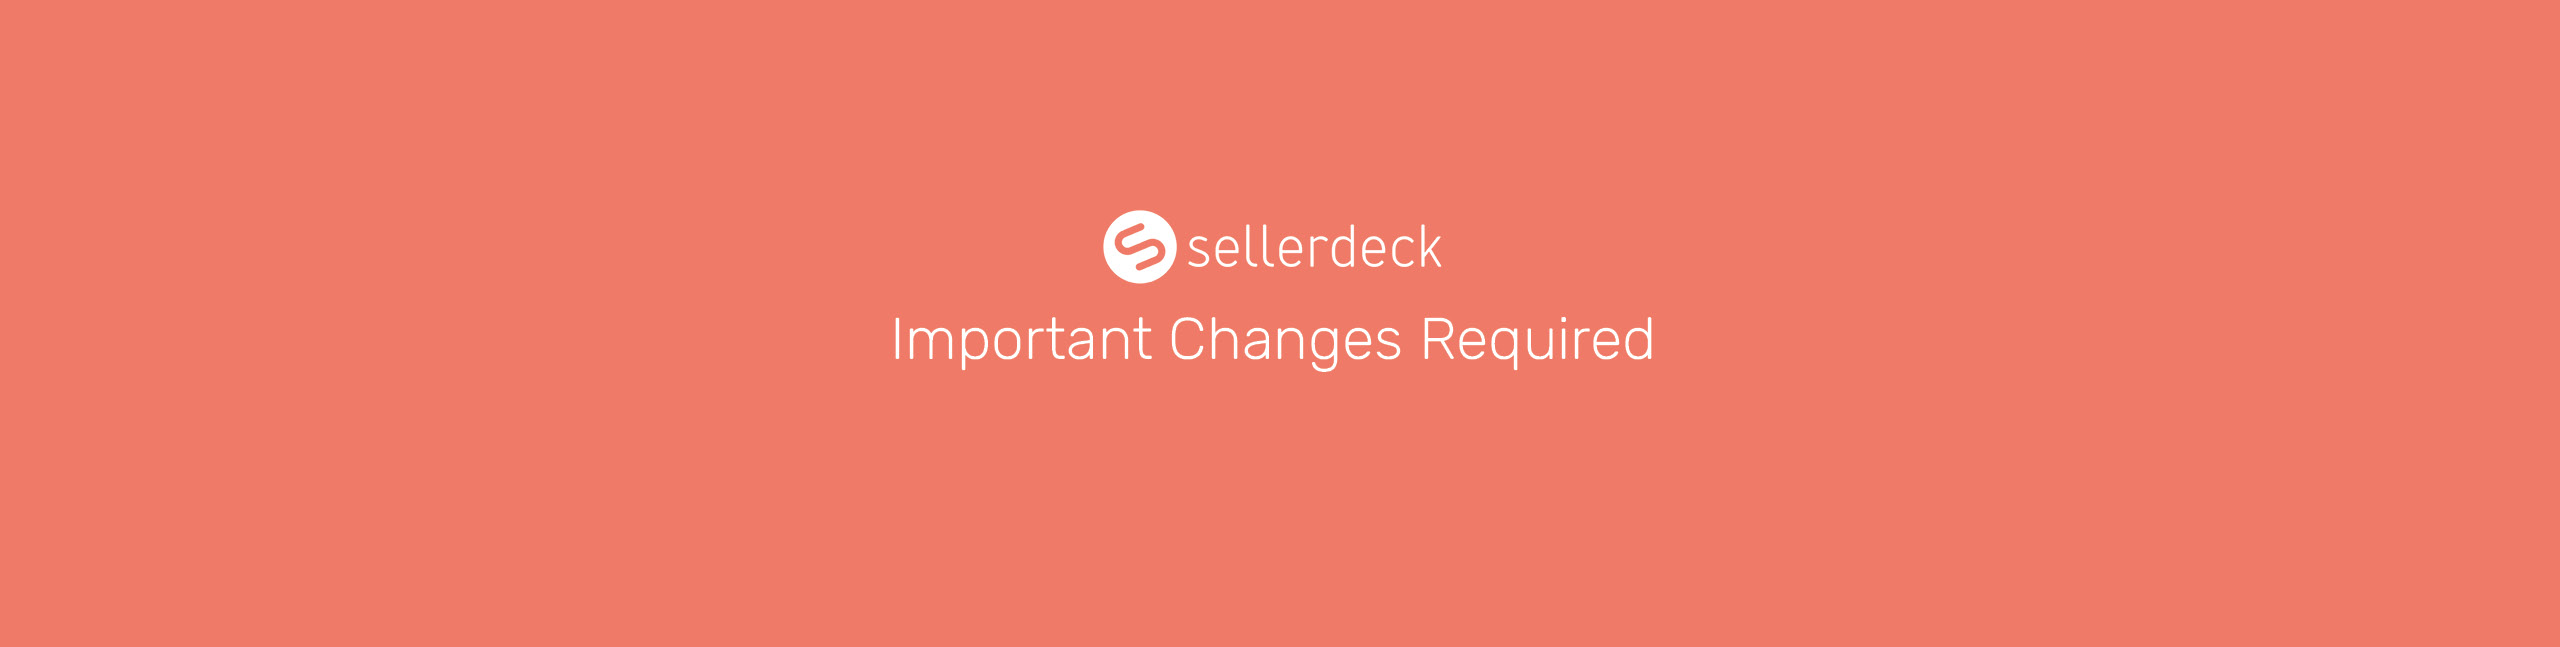 Important changes required Sellerdeck banner